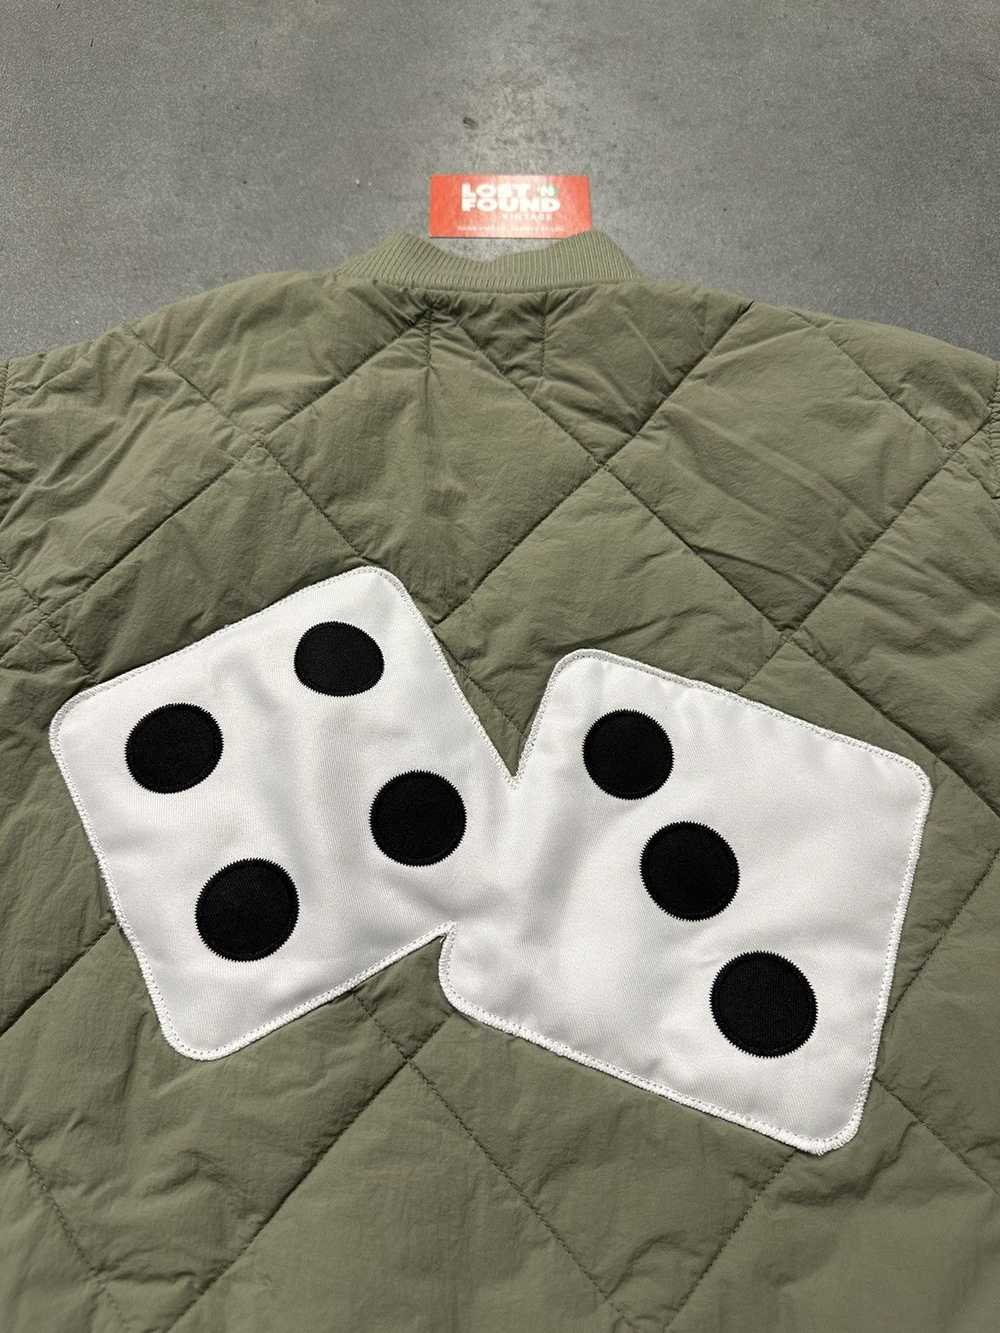 Stussy Stussy Dice Quilted Bomber Jacket - image 3